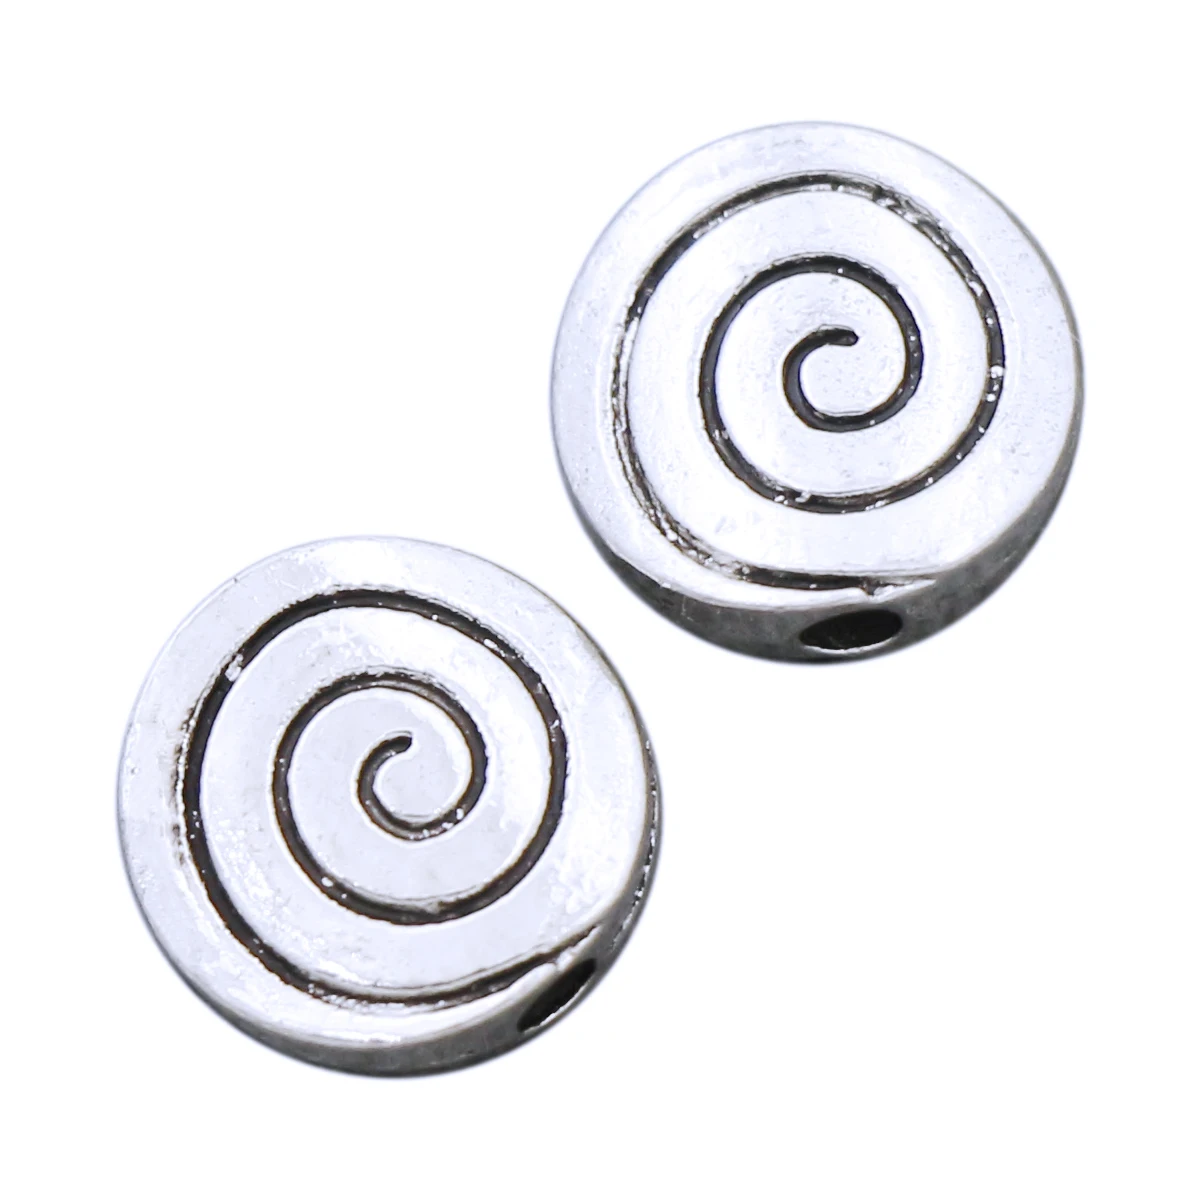 

Swirl Curved Rondelle Beads Spacers Jewelry Findings L609 25pcs 9.3x9.3mm Zinc Alloy Radiant Shape Metal Lzsilver